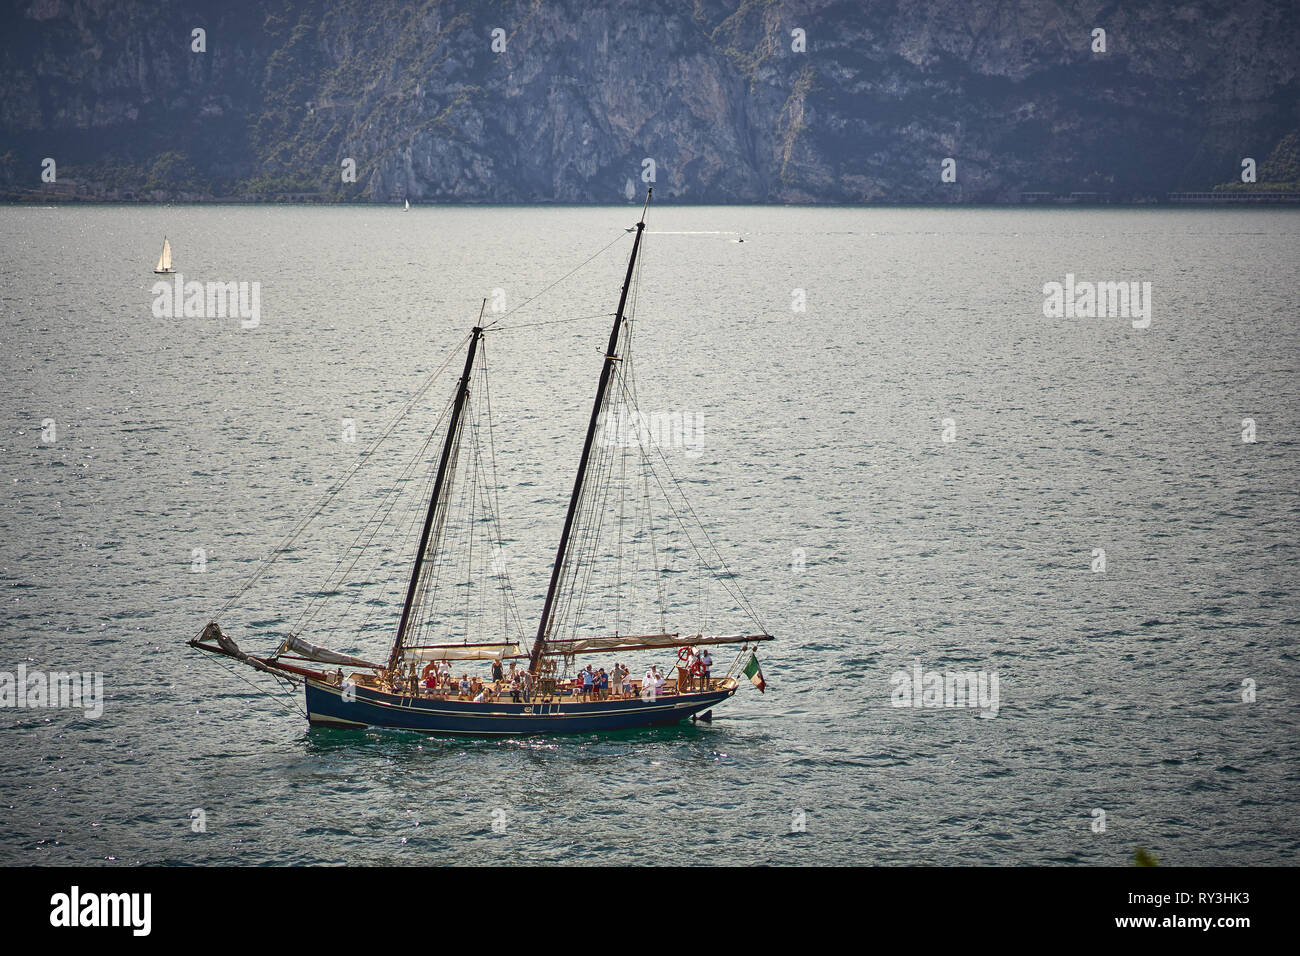 Malcesine, Italy - August, 2018. A sailboat on the lake Garda, the biggest Italian lake, near the town of Malcesine. Stock Photo